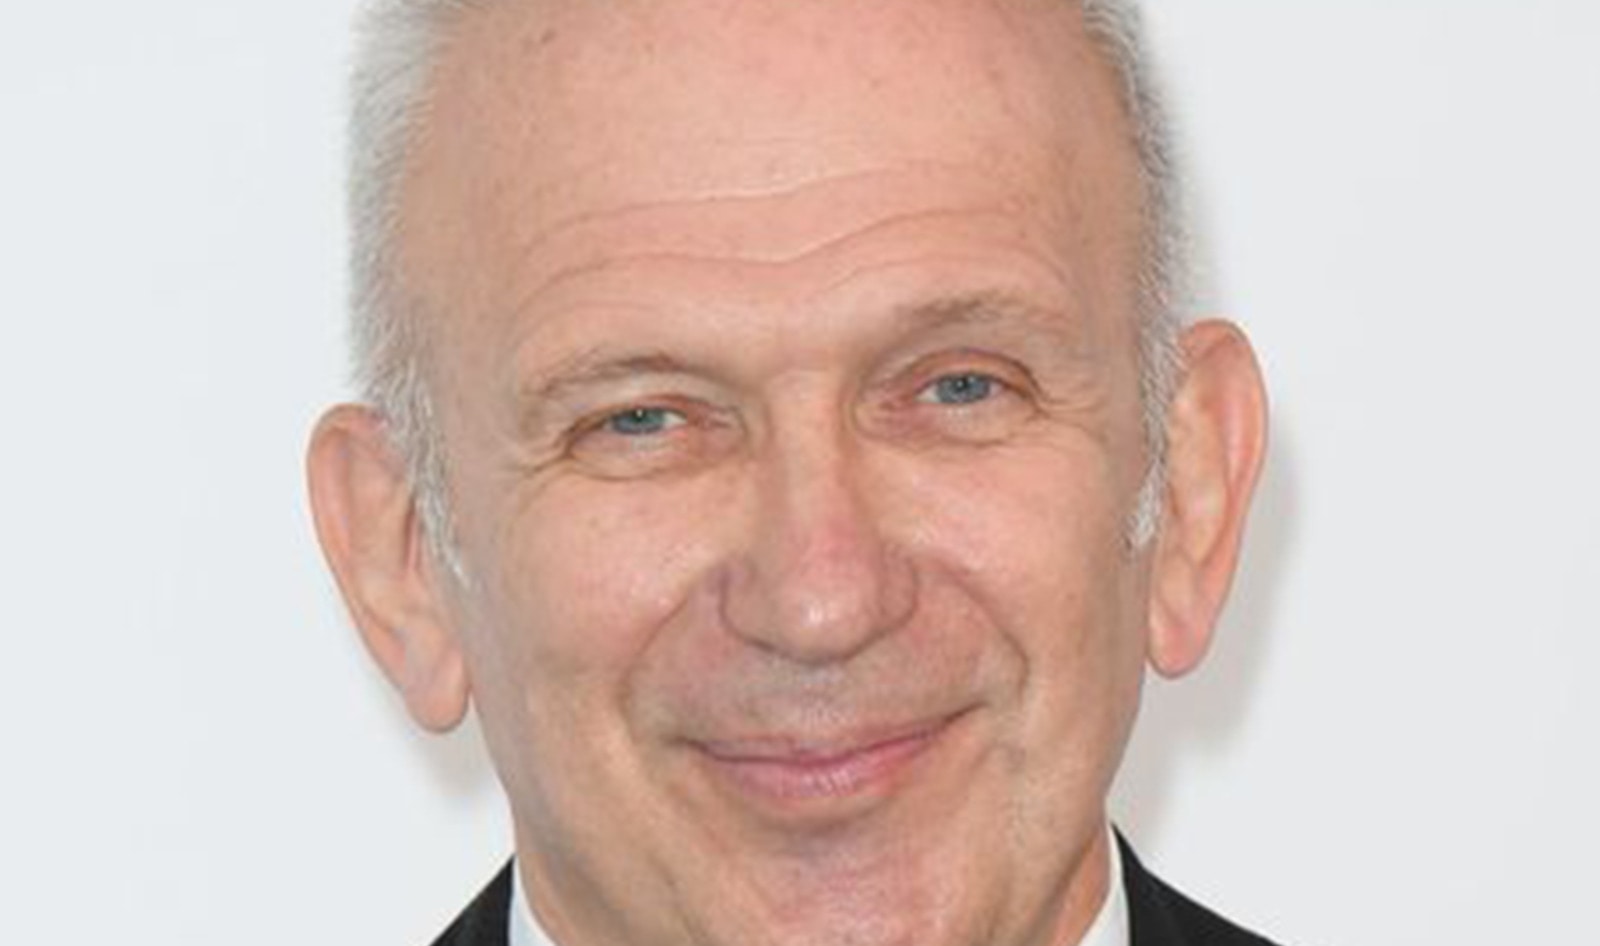 Iconic Designer Jean Paul Gaultier Cuts Ties With “Absolutely Deplorable” Fur Industry